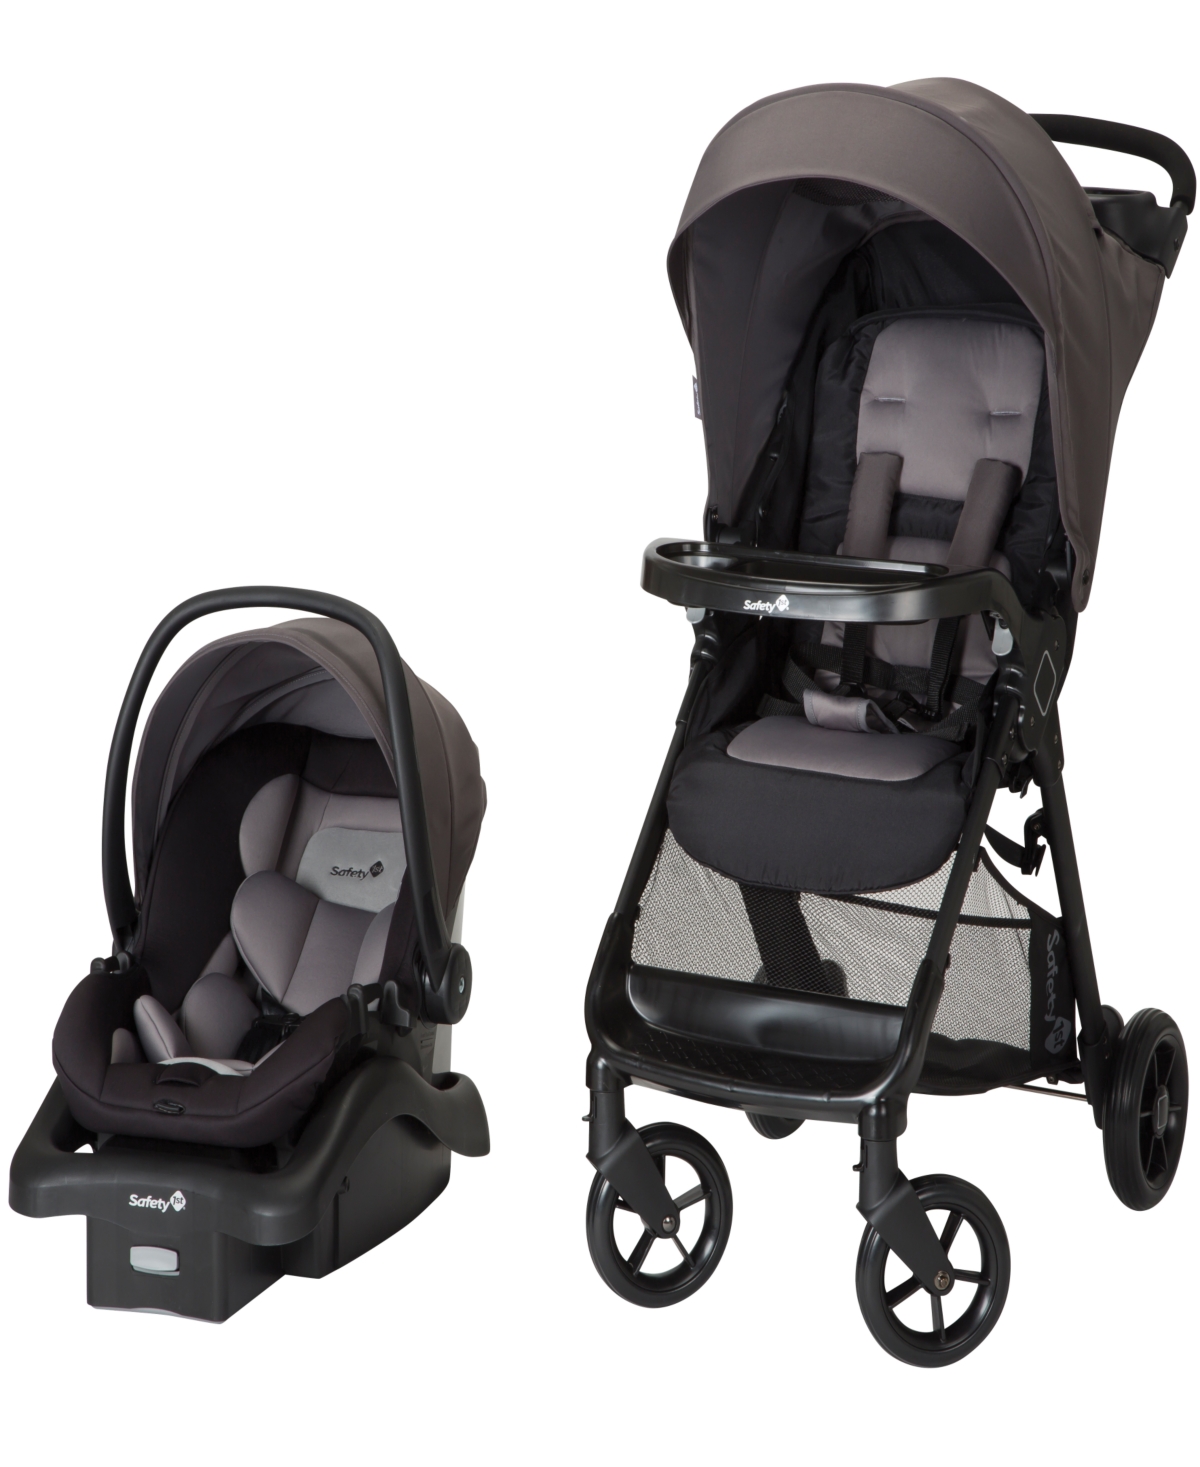 Safety 1st Smooth Ride Travel System In Pewter